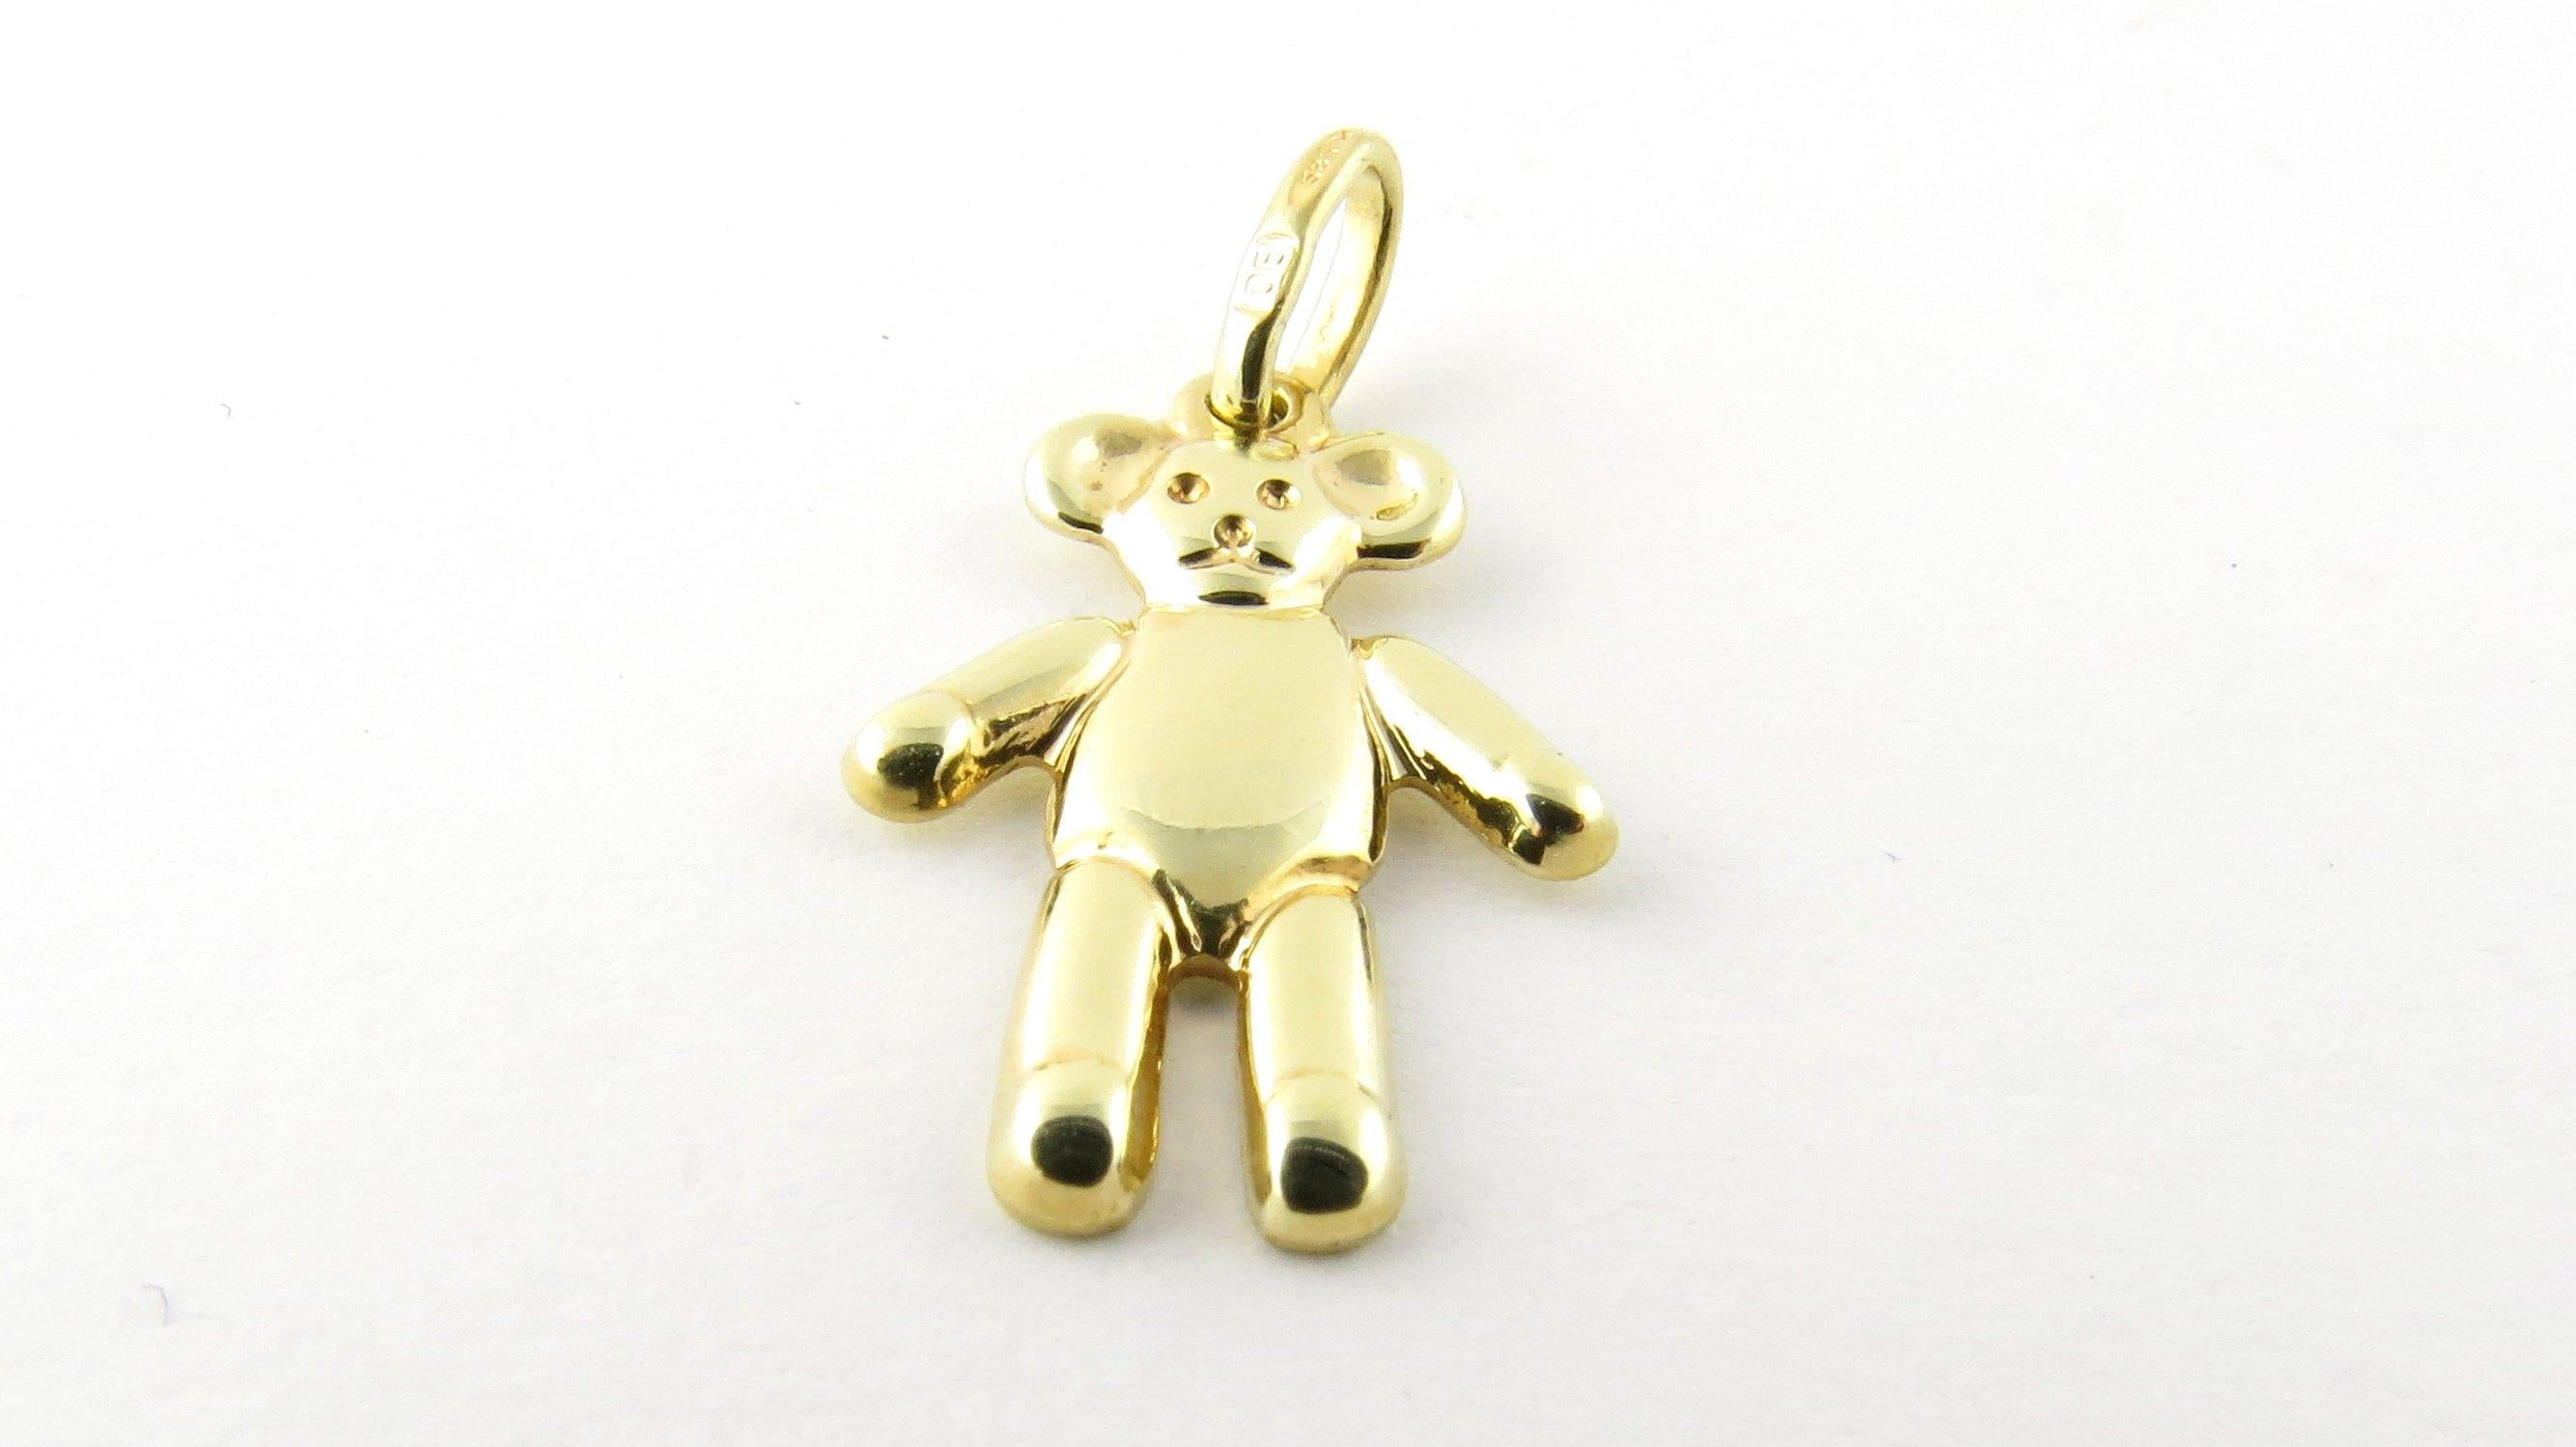 Vintage 14 Karat Yellow Gold Teddy Bear Charm. This cuddly fellow needs a forever home! This lovely charm features an adorable teddy bear meticulously detailed in 14K yellow gold.
Size: 20 mm x 14 mm (actual charm) Weight: 1.0 dwt. / 1.7 gr.